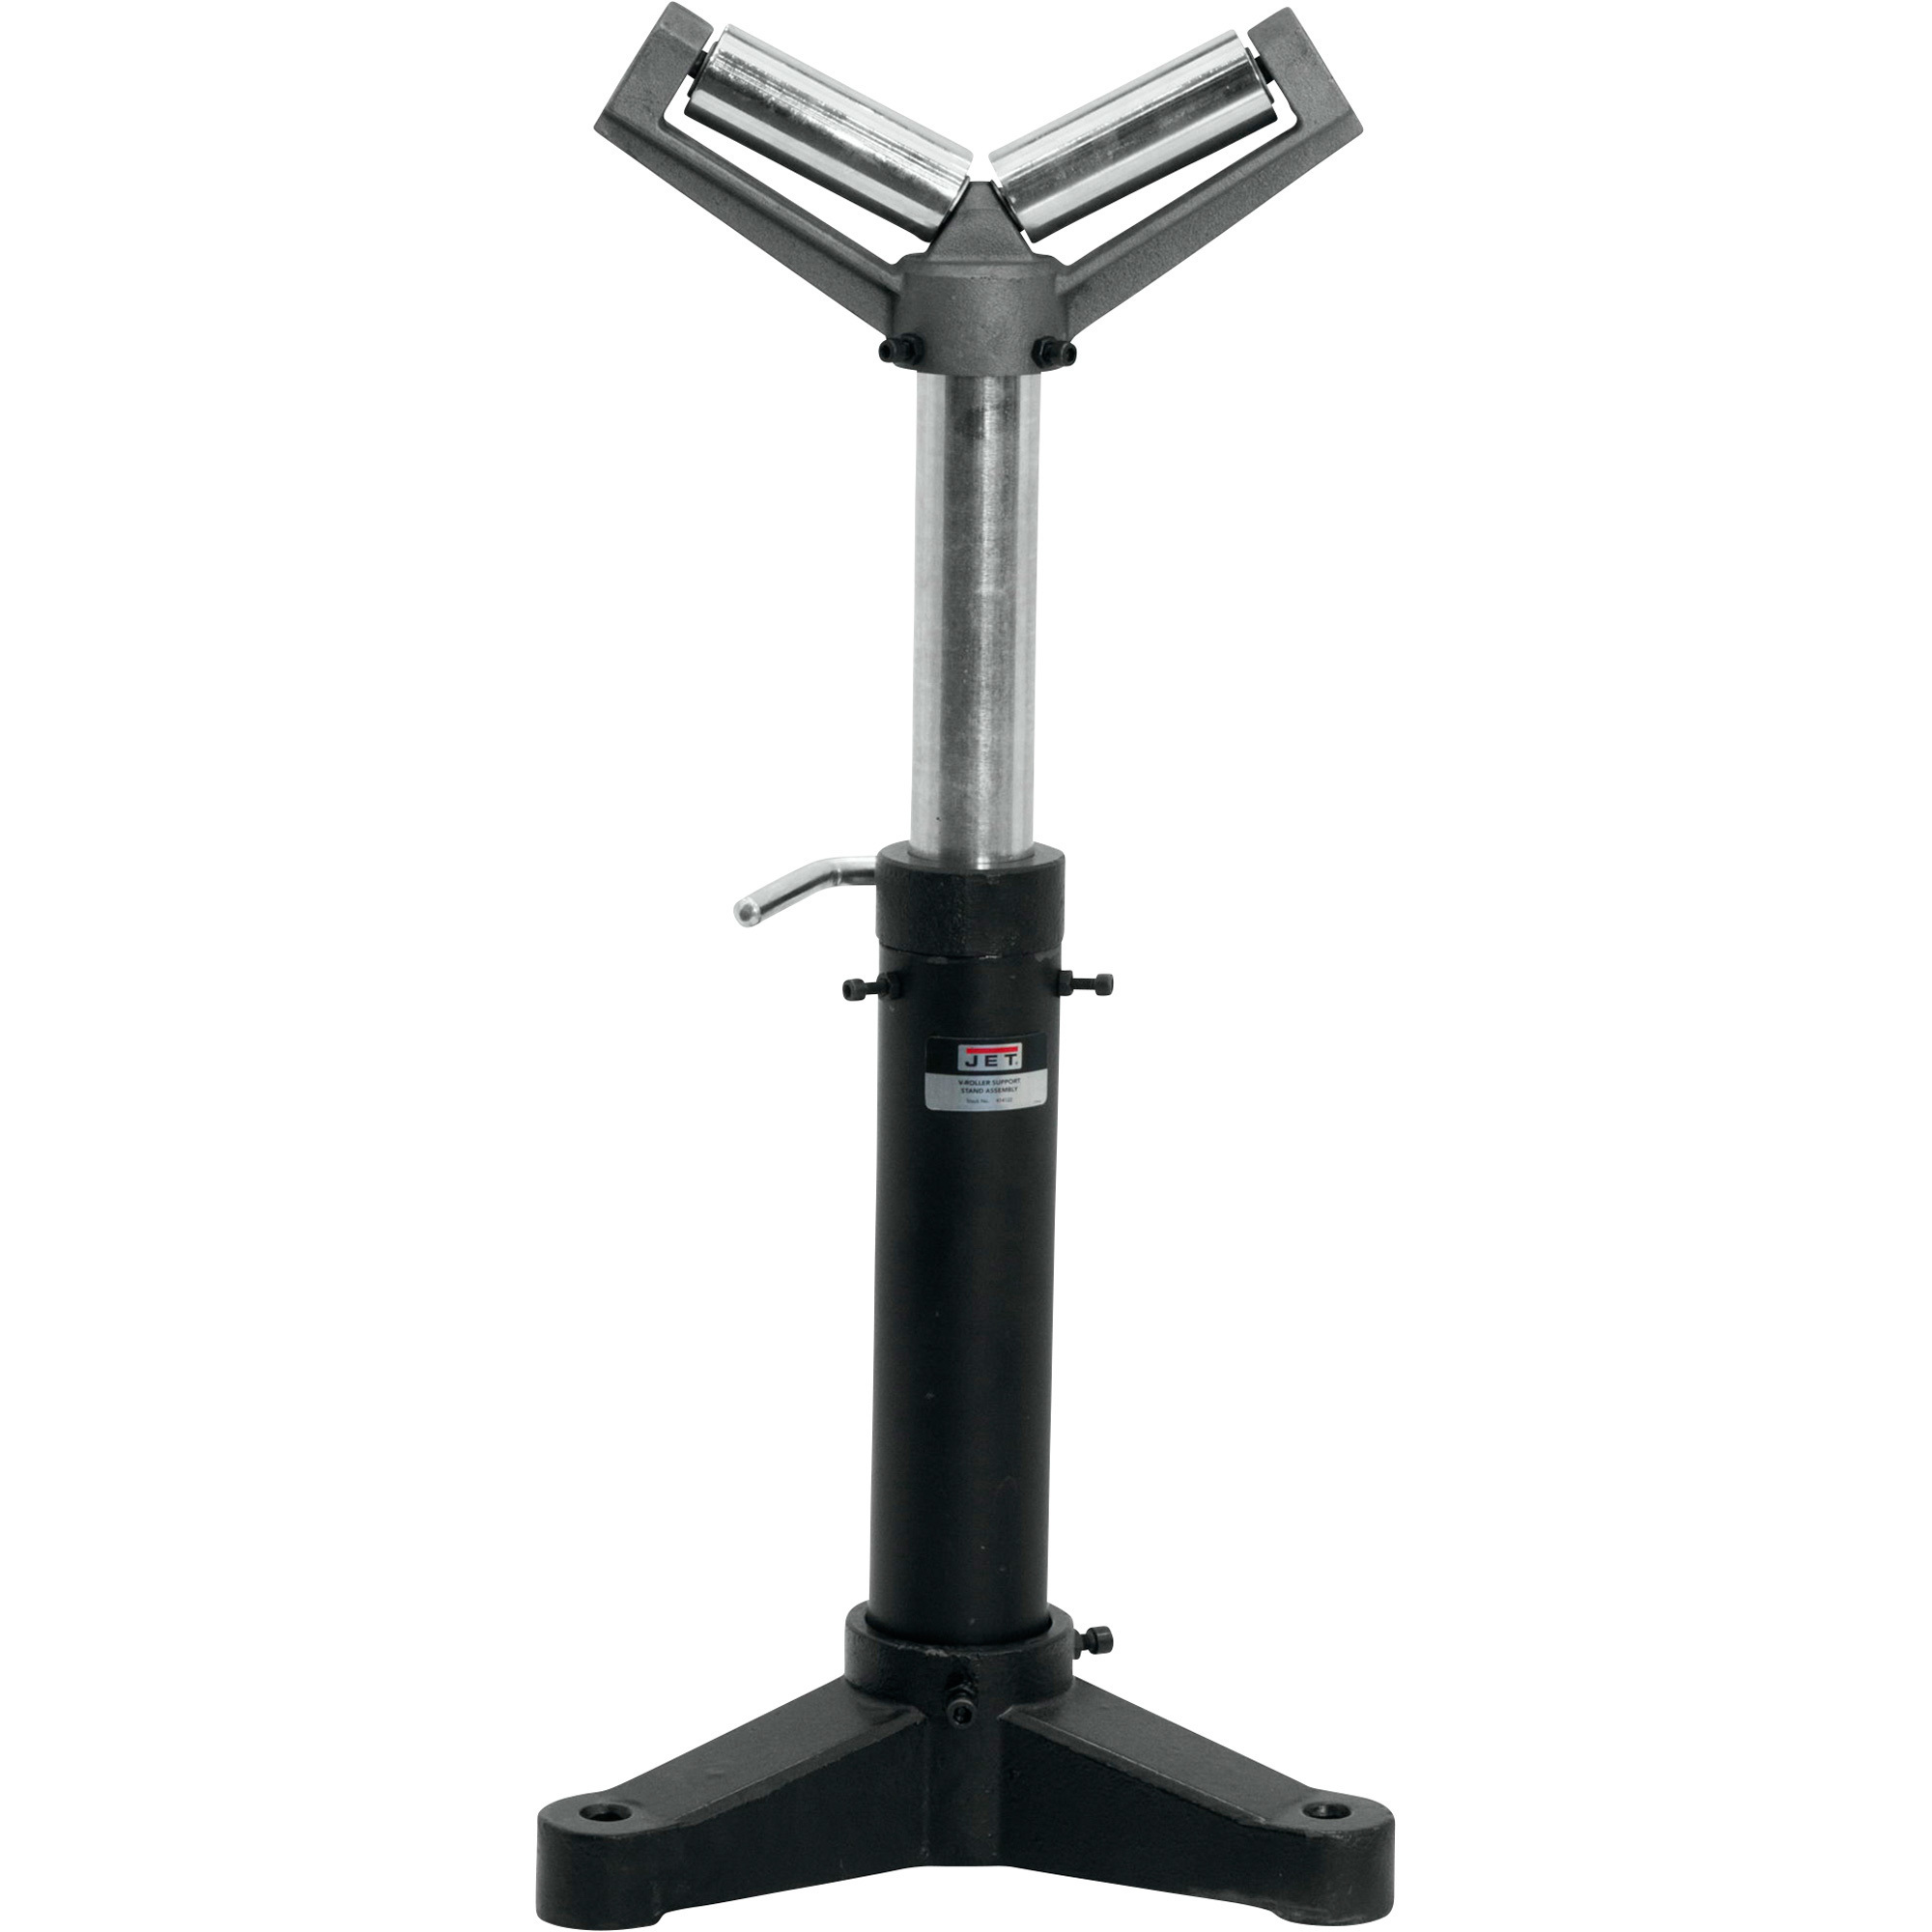 Adjustable Stand with Steel Rollers